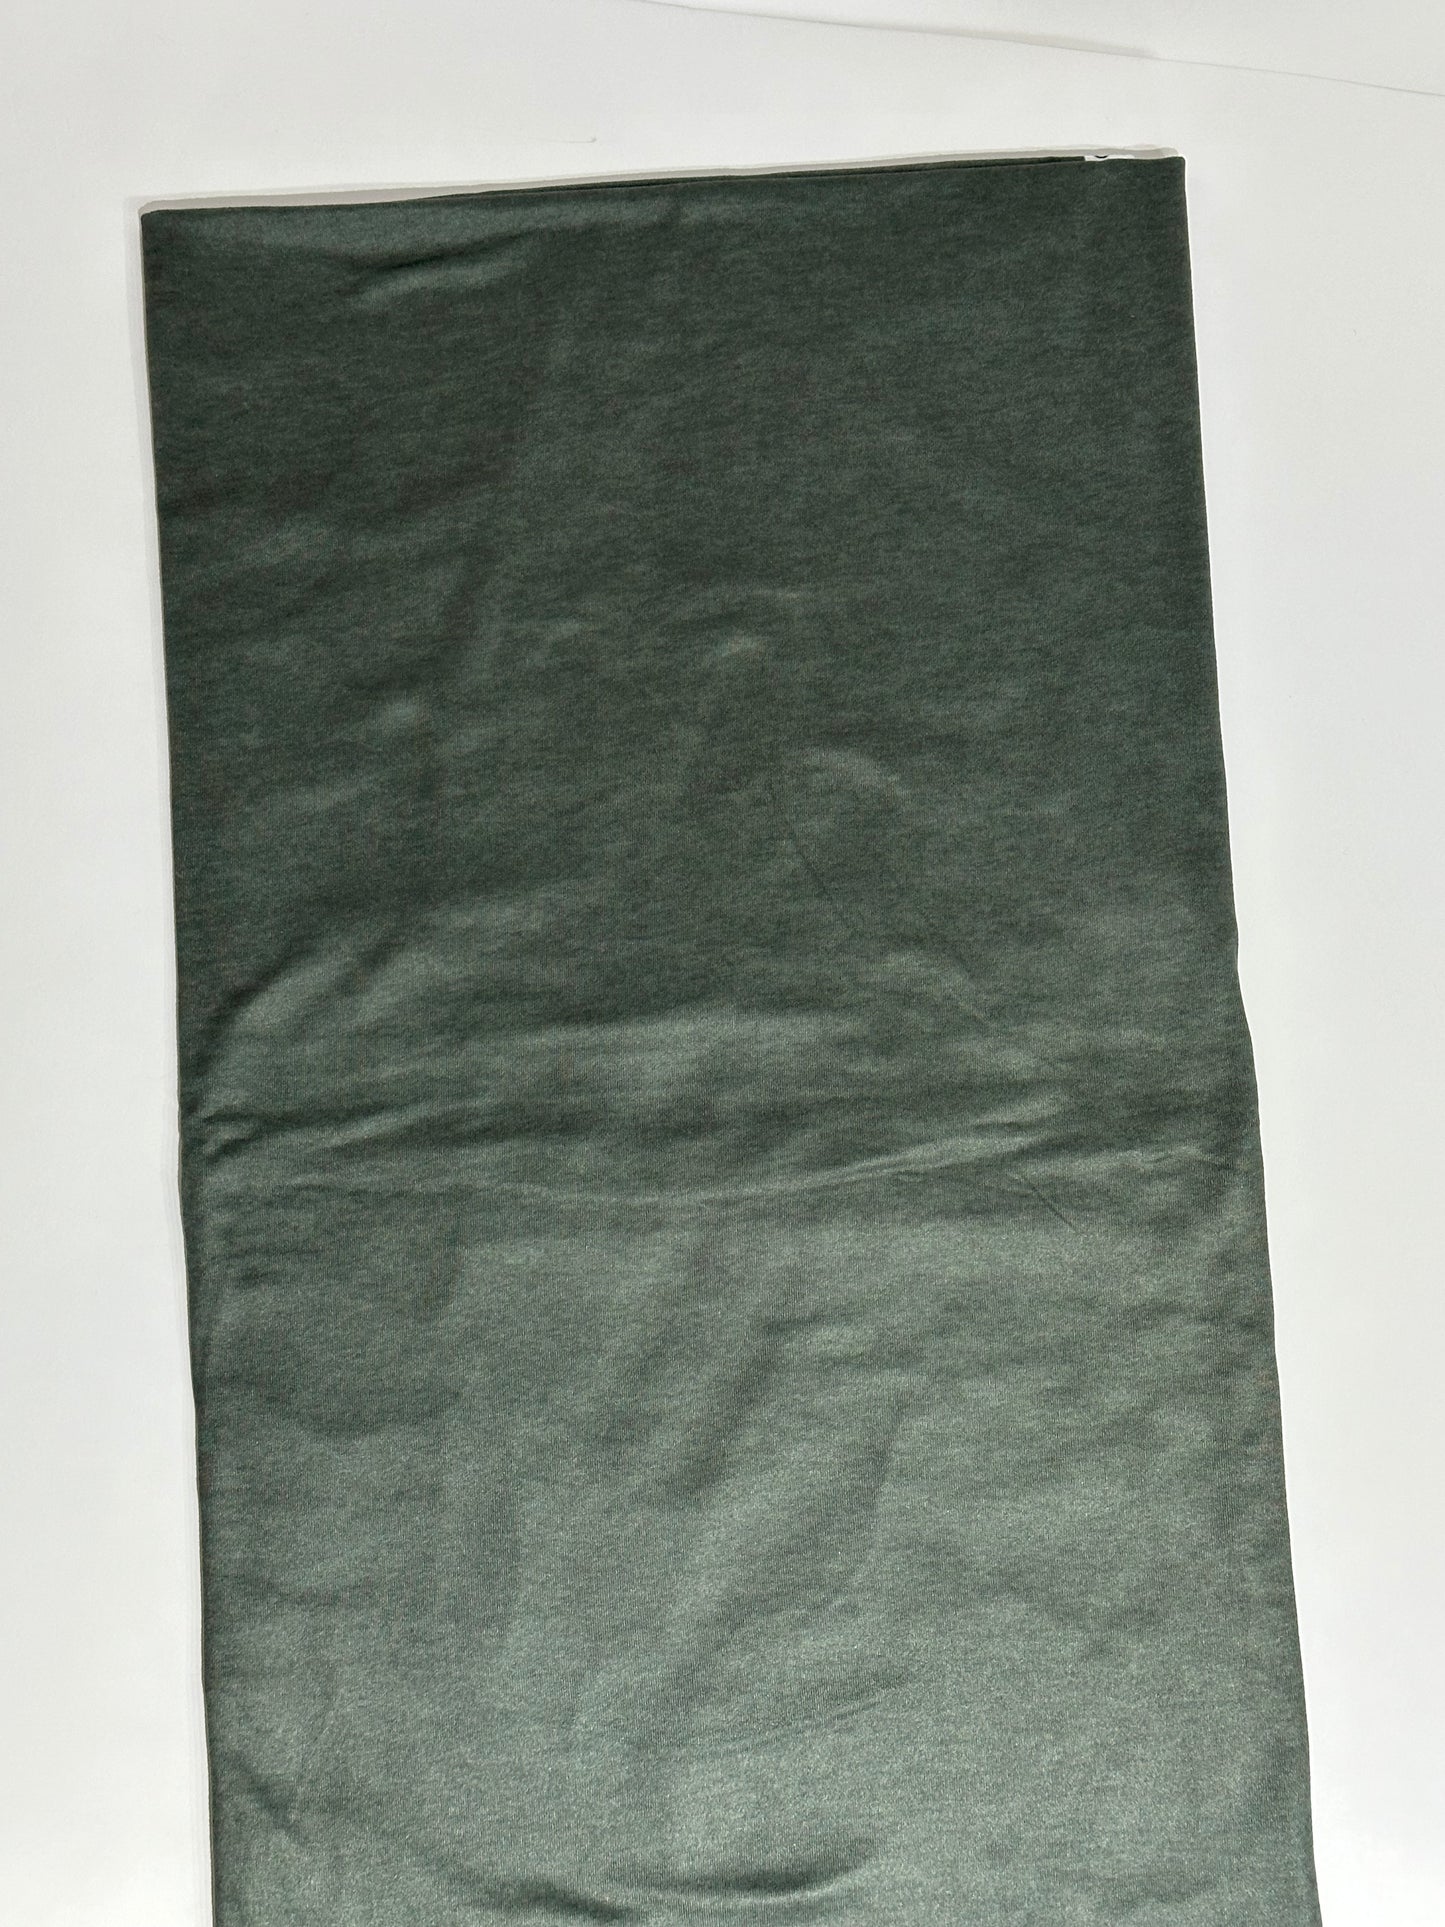 Heathered Solid in Olive on Double Brushed Poly Knit Fabric Sold by the 1/4 yard